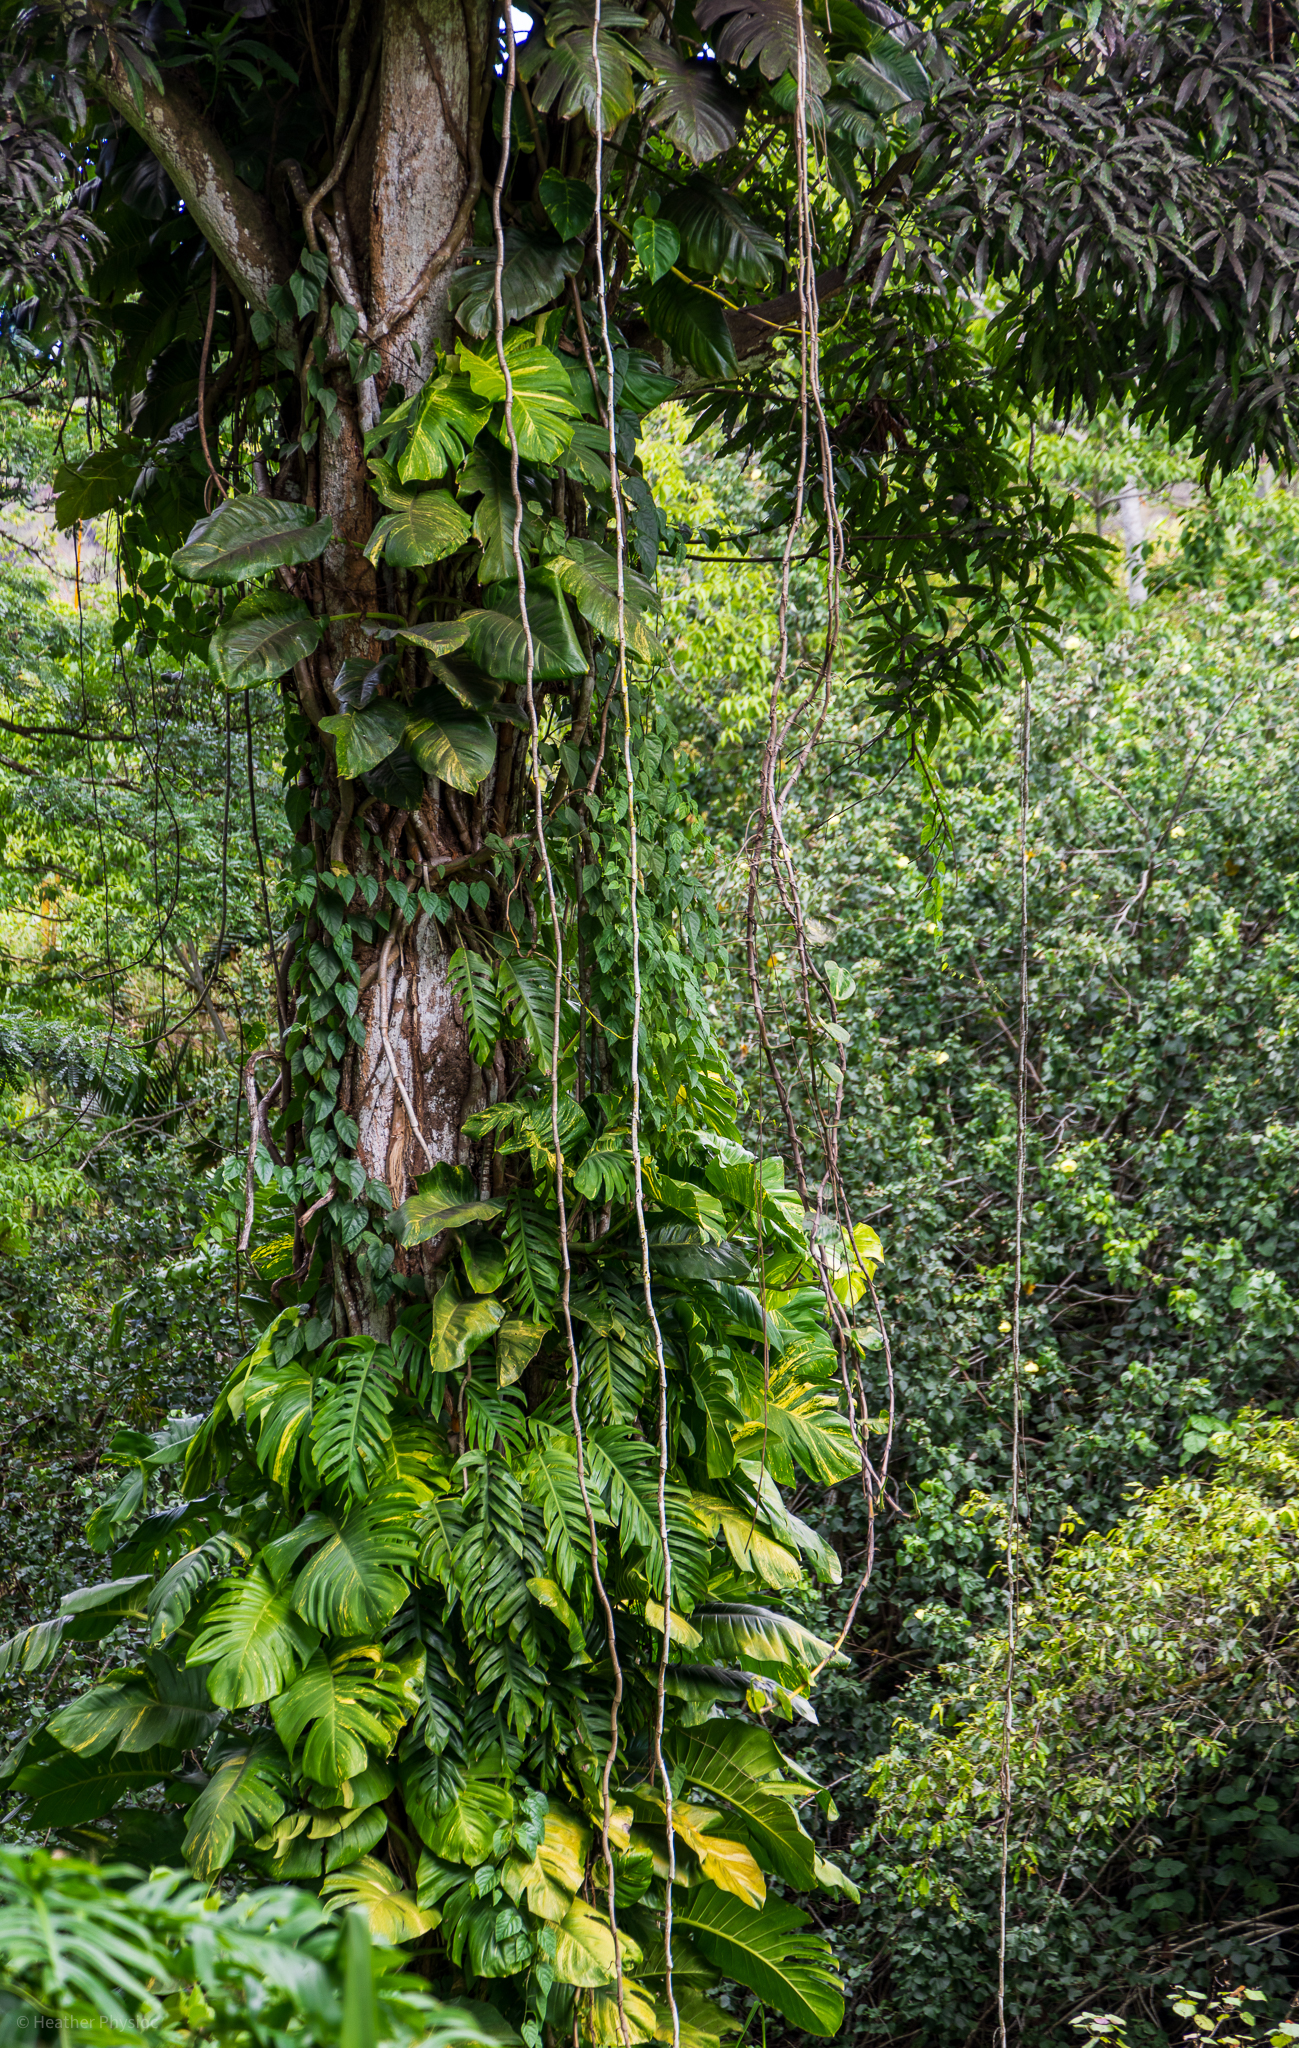 Rainforest vines hanging from giant, leafy tropical trees on O'ahu, Hawaii